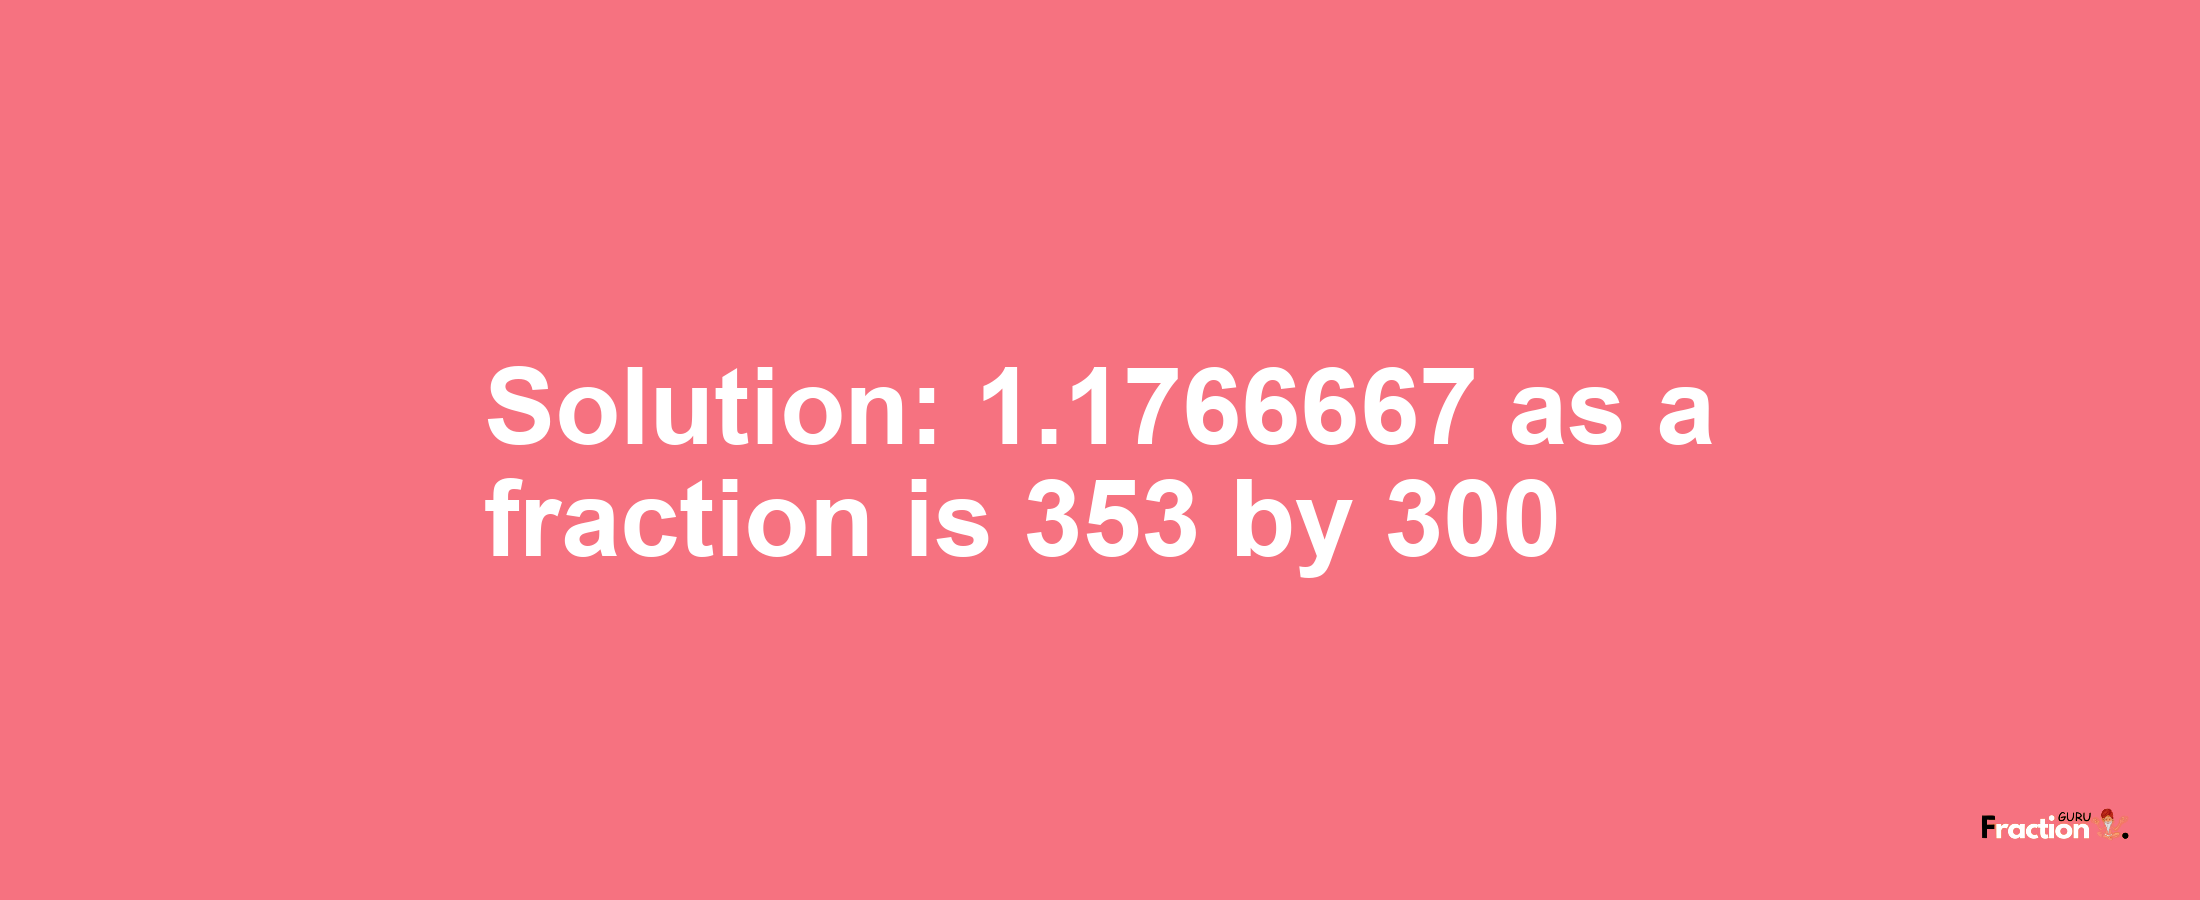 Solution:1.1766667 as a fraction is 353/300